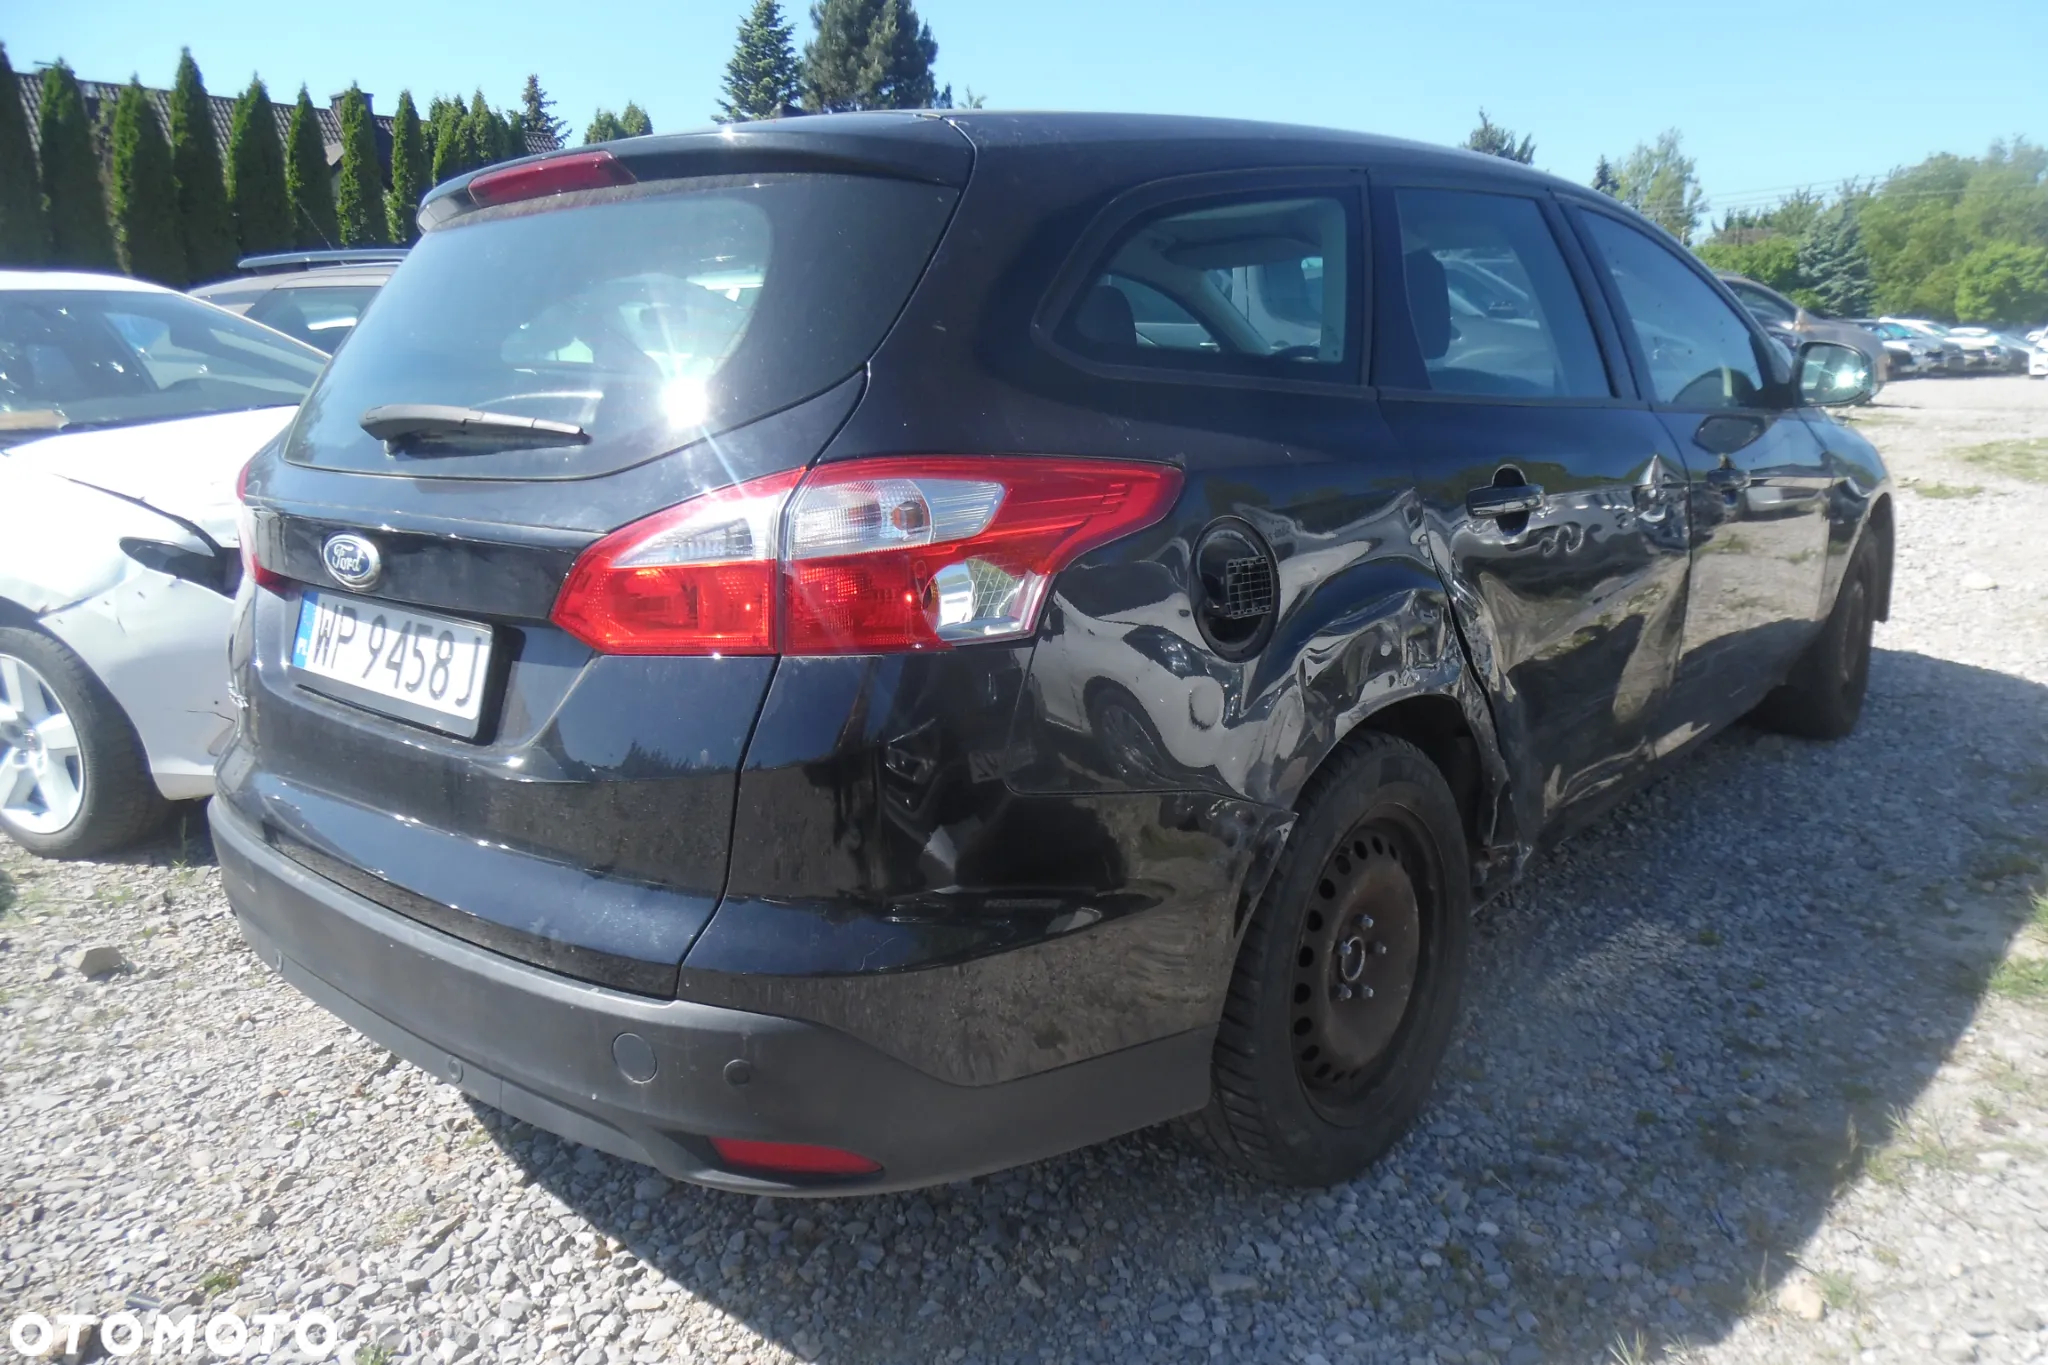 Ford Focus 1.6 TDCi DPF Ambiente - 3